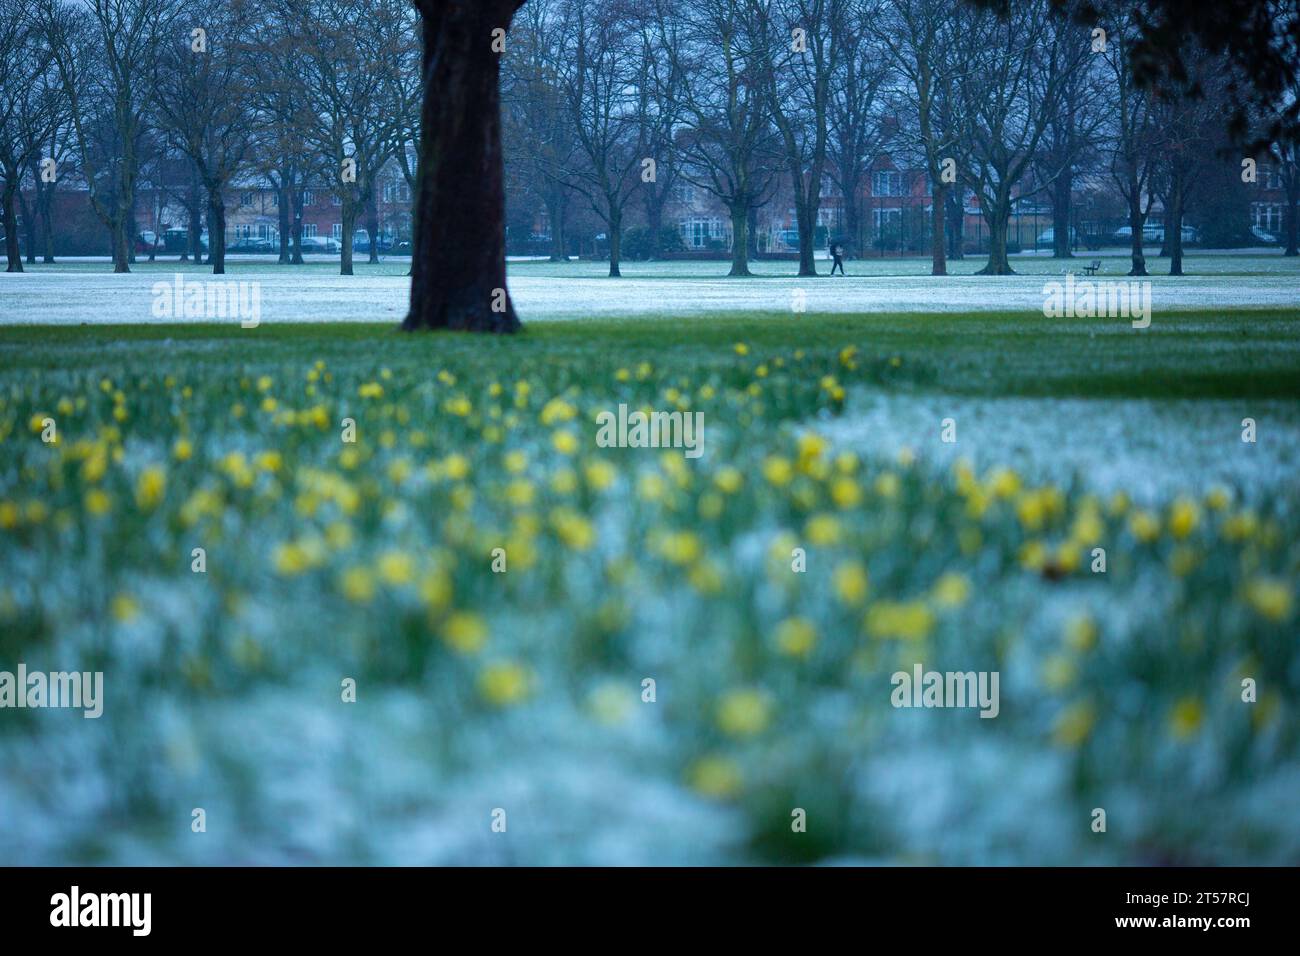 A park is seen snow-covered in Ilford, east London, in the morning. Stock Photo